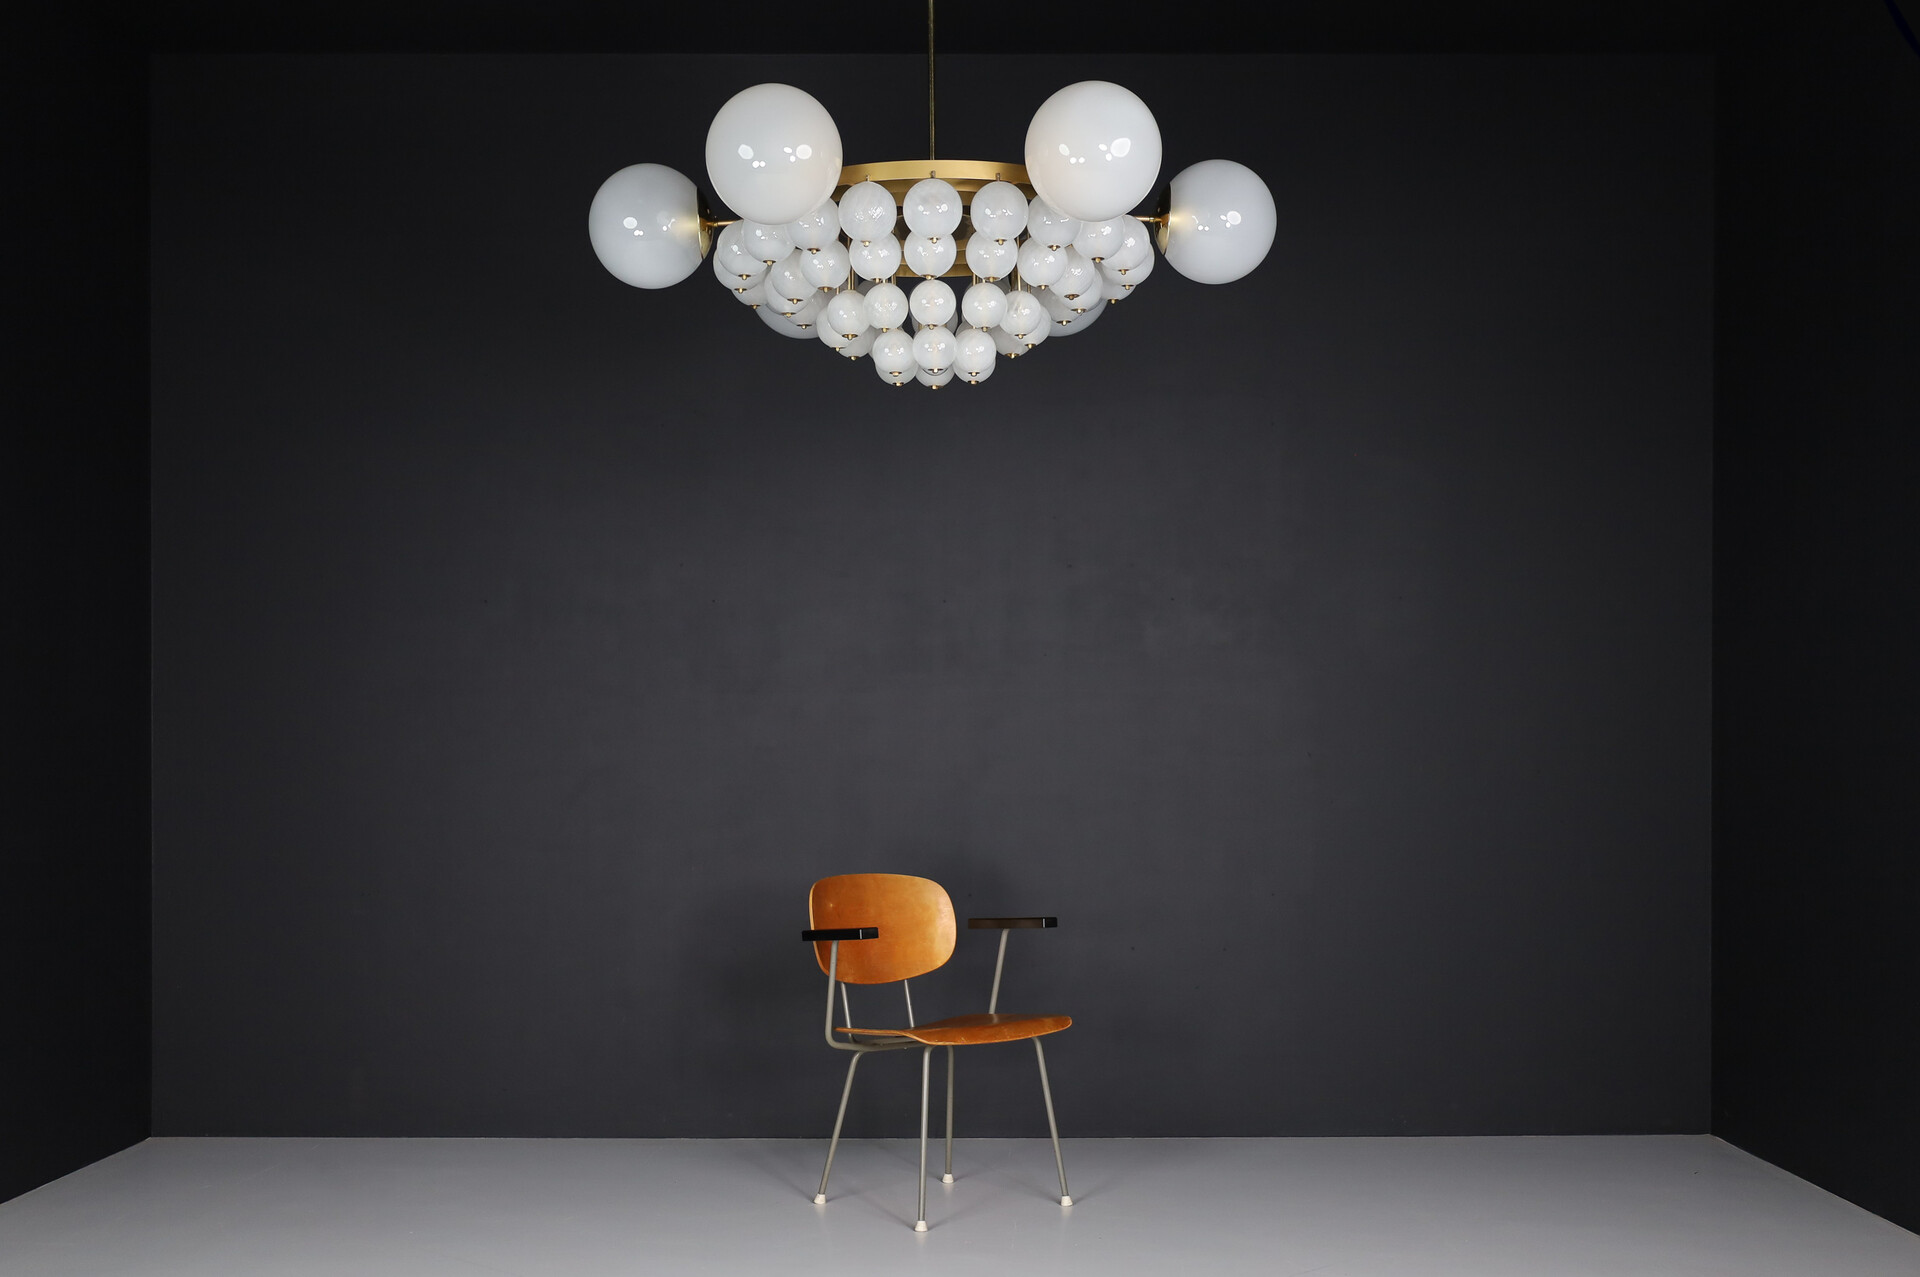 Mid century modern Grand Bohemian Chandelier with Brass Fixture & Hand-blowed Frosted Glass Globes 1960s Mid-20th century